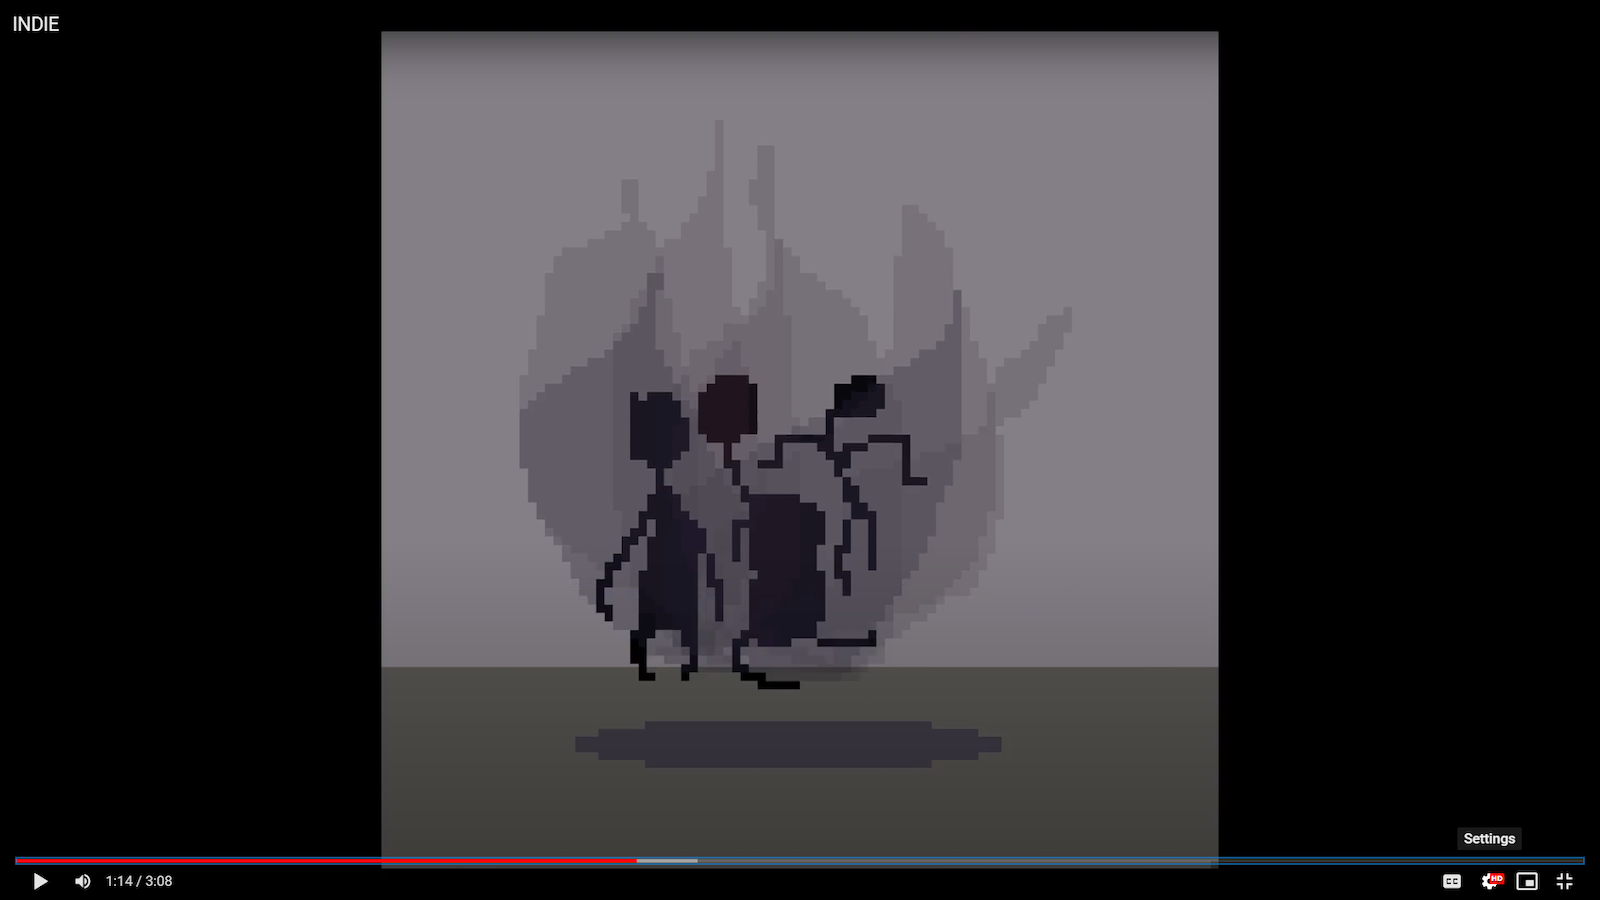 Still from a YouTube video showing old-style pixel art